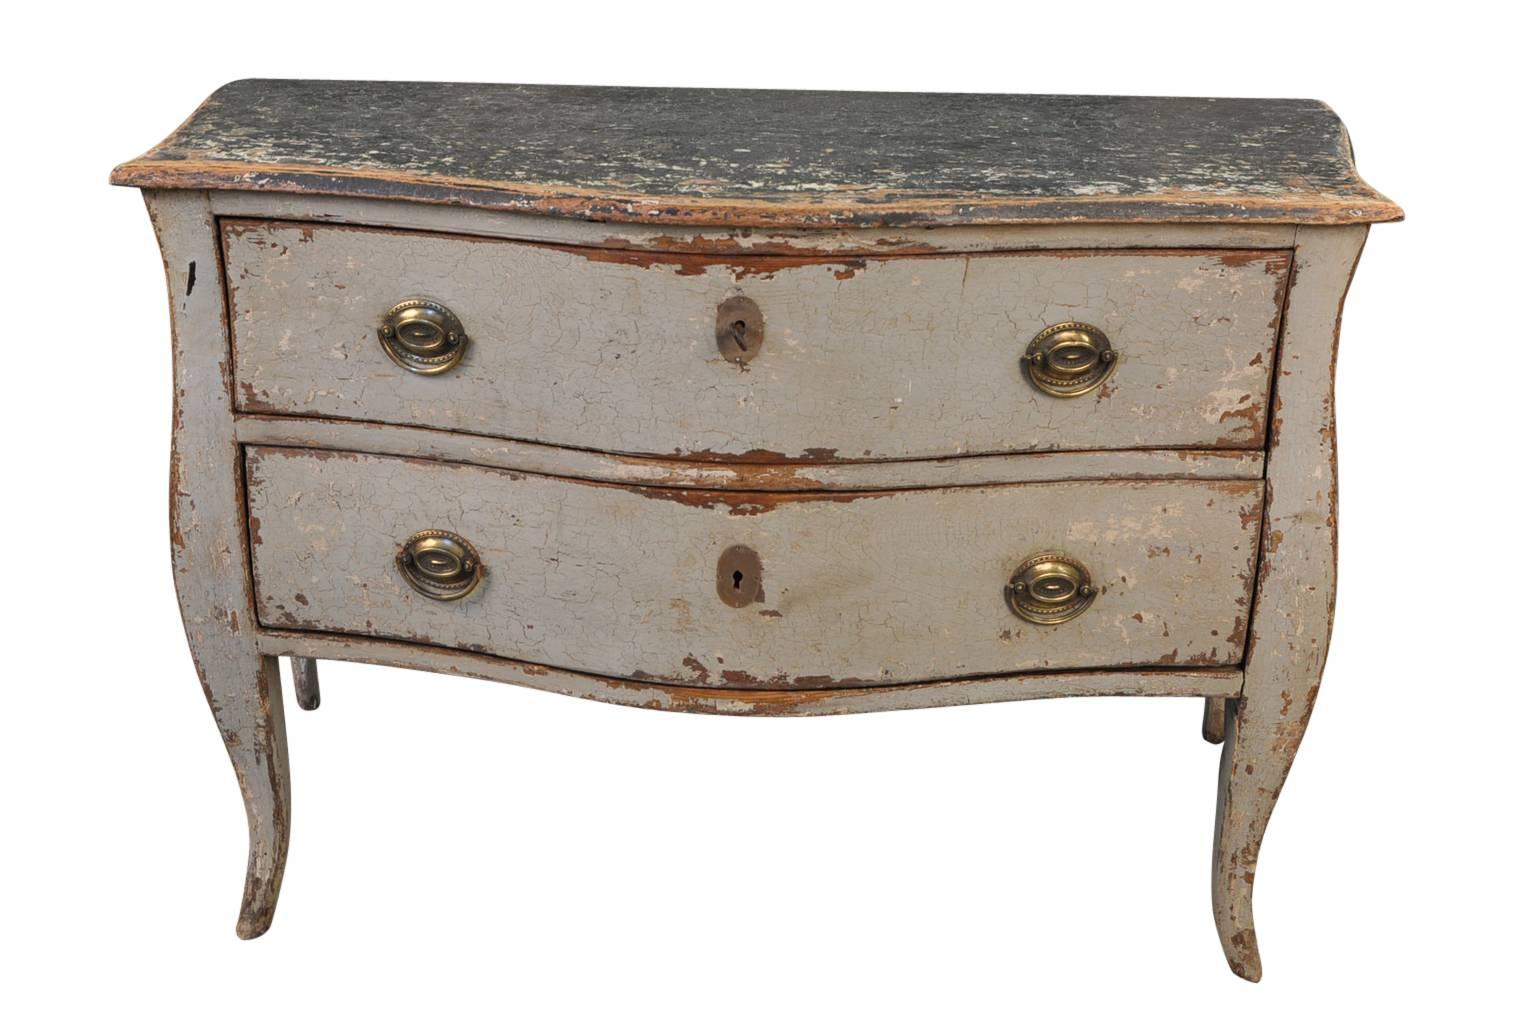 A very lovely French mid-19th century painted commode. Beautifully constructed with a graceful serpentine movement, two drawers on soft cabriole legs. A wonderful piece for any foyer, living area or bedroom. It would also convert beautifully into a